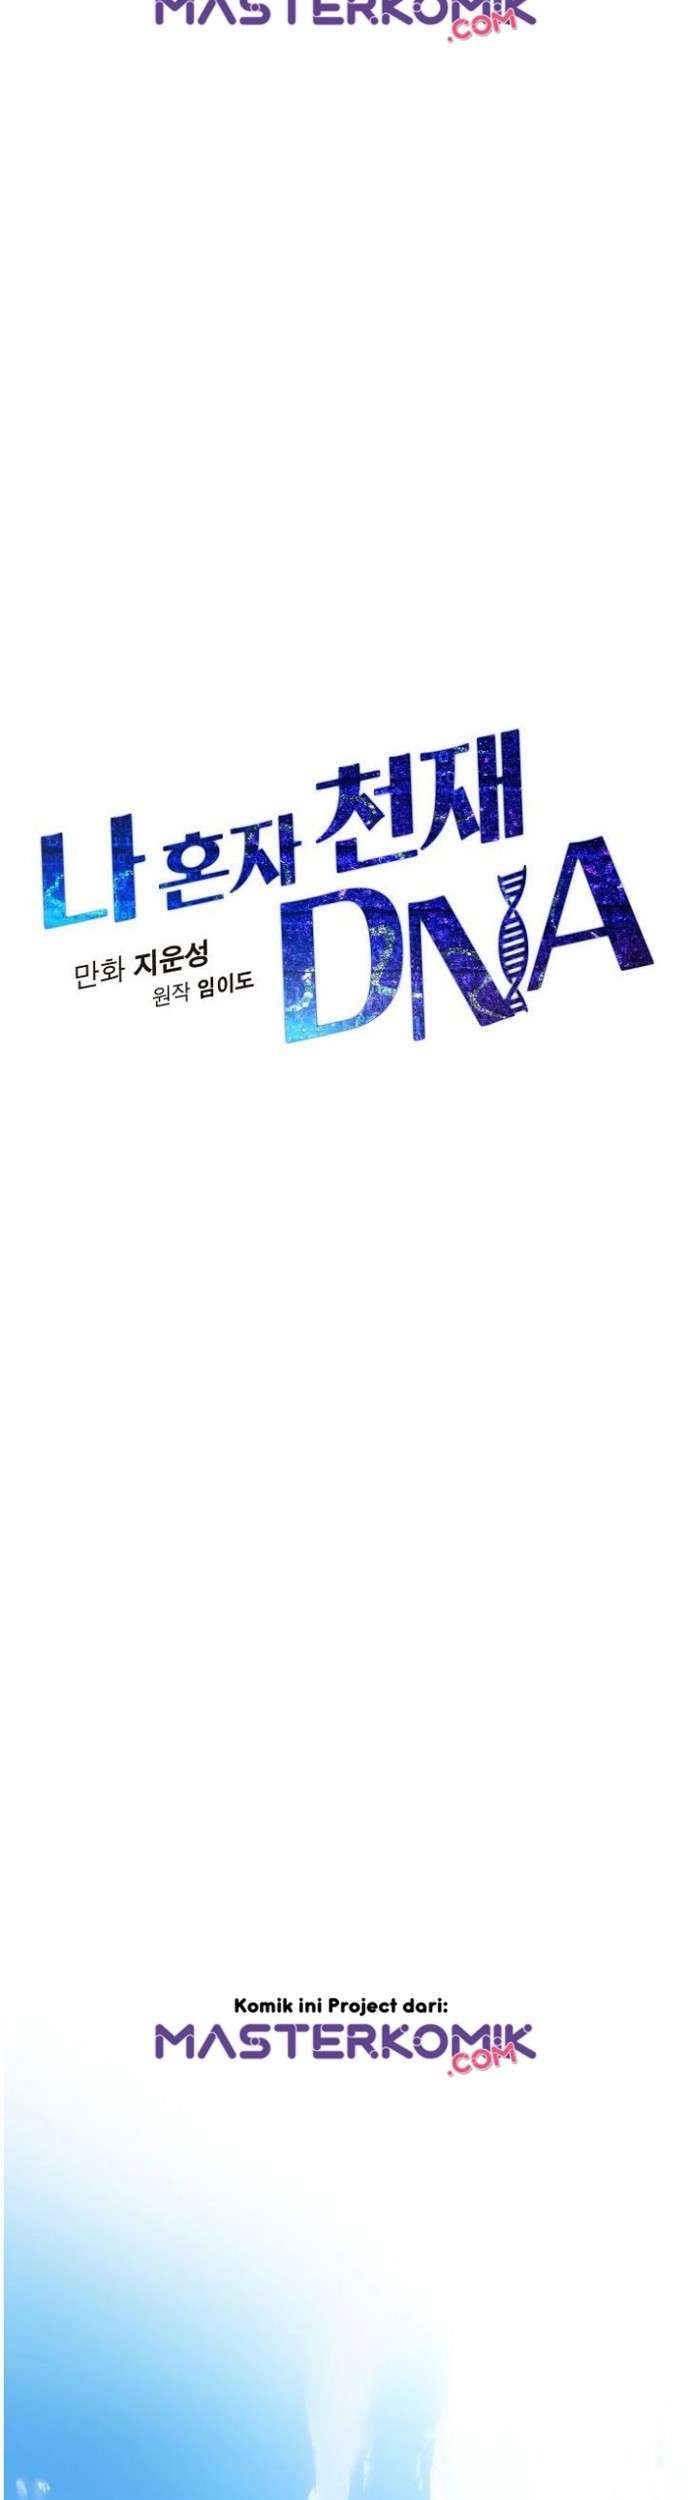 I Am Alone Genius DNA Chapter 33